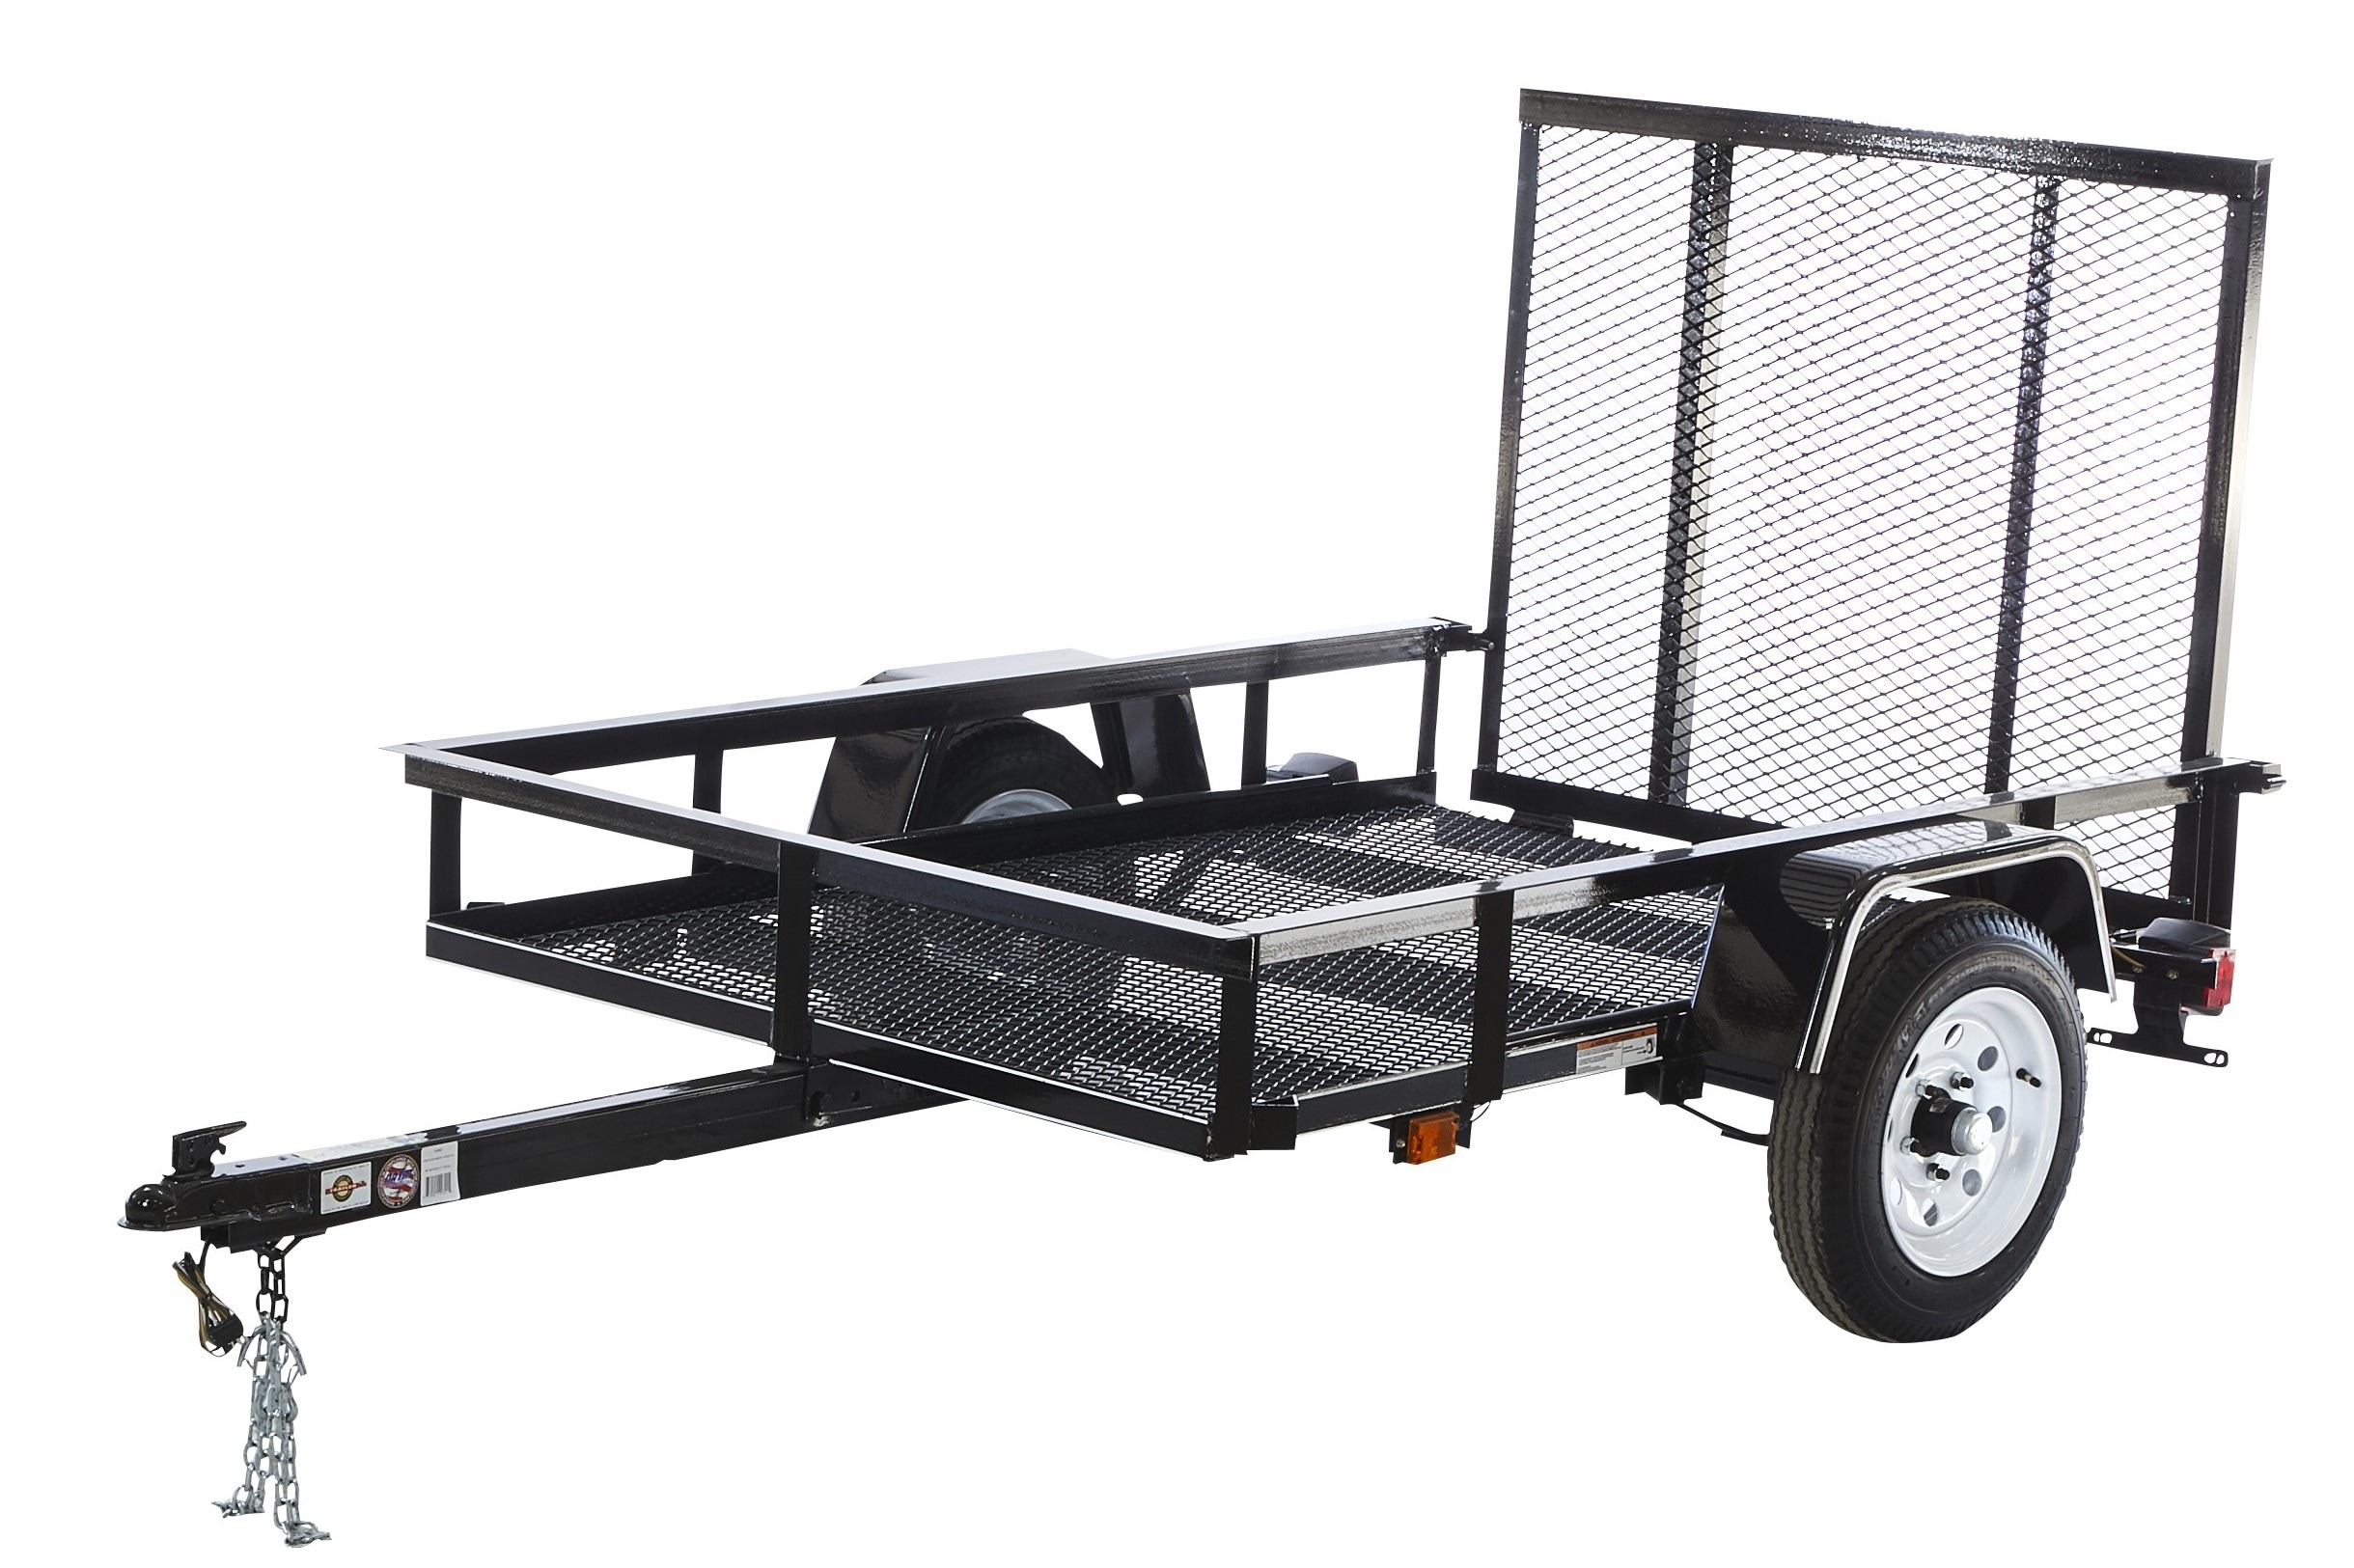 BIG Bobby-Car Trailer specifications